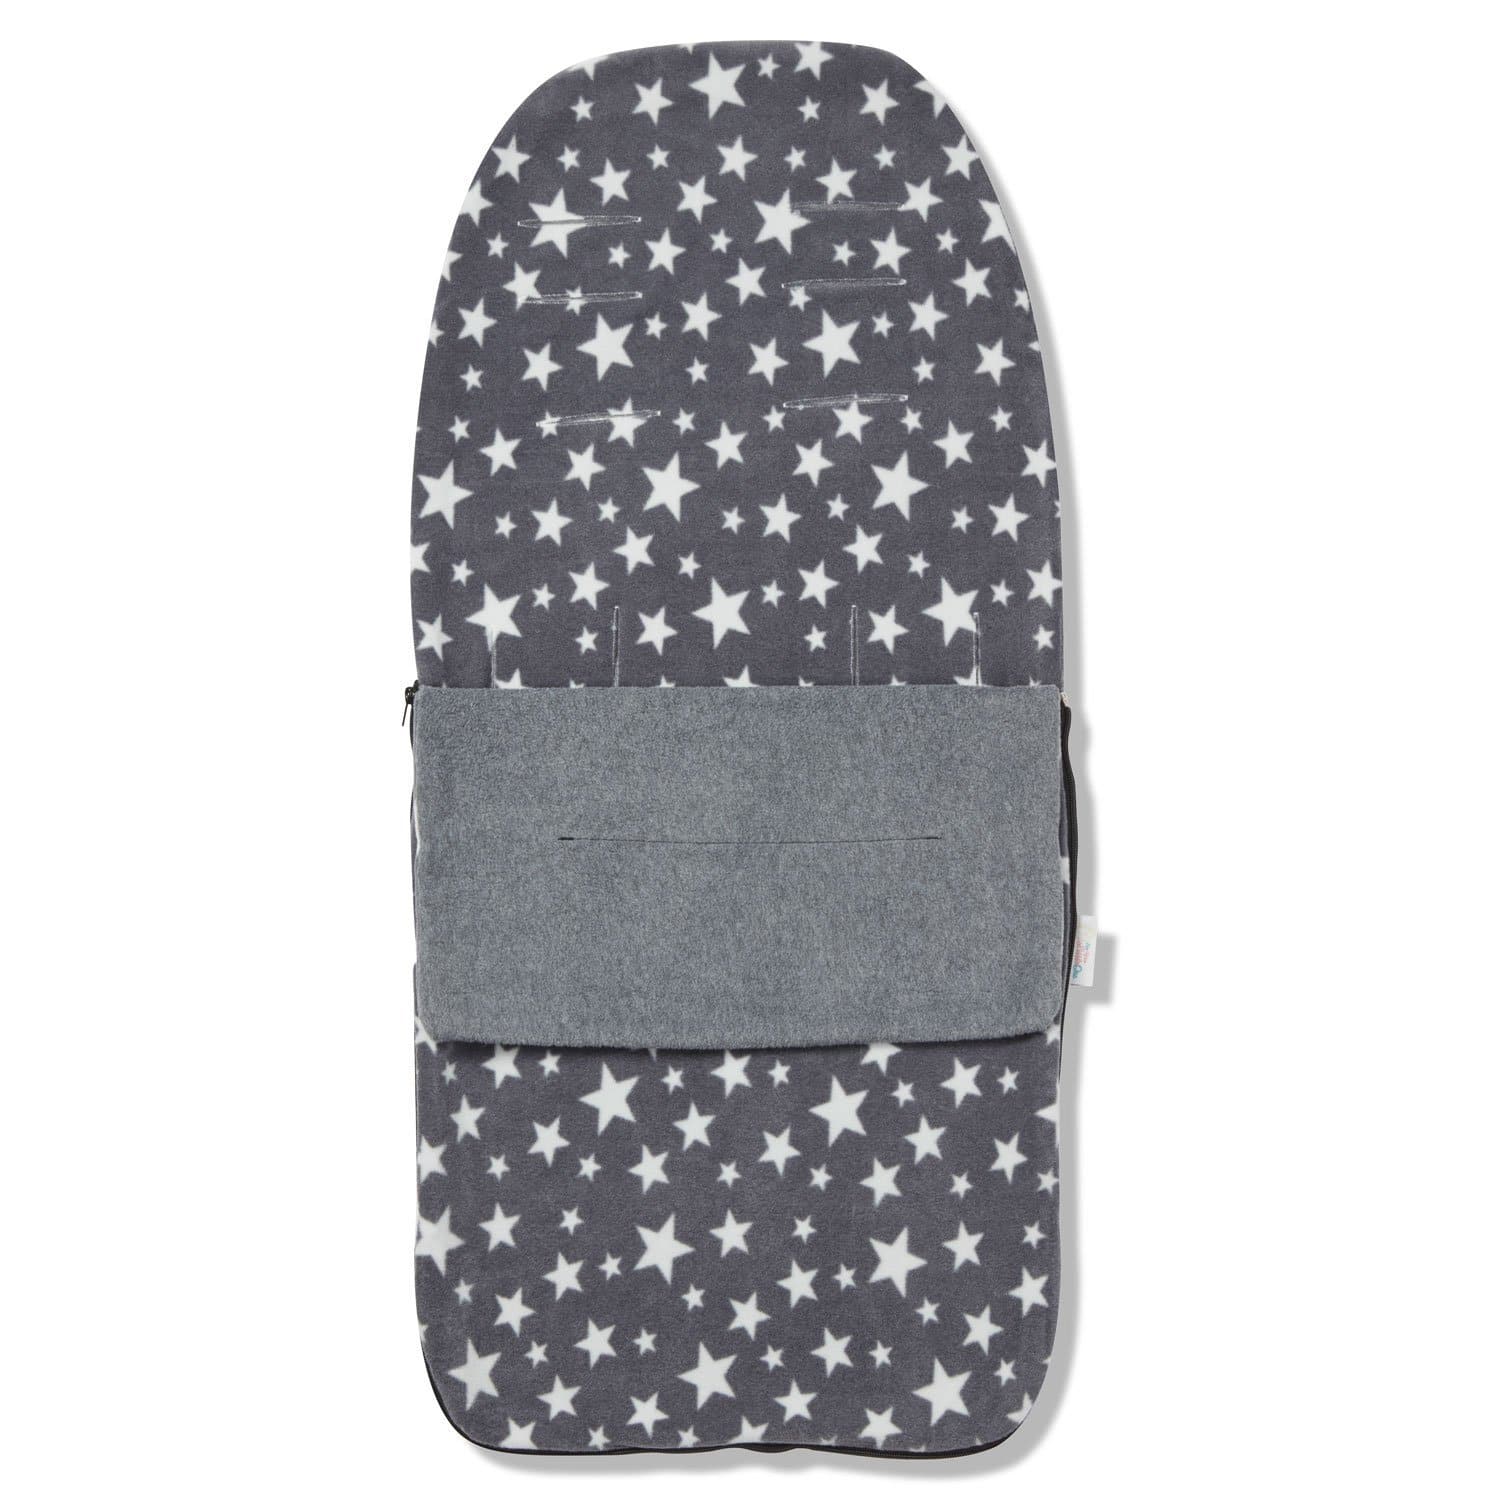 Snuggle Summer Footmuff Compatible with Recaro - For Your Little One